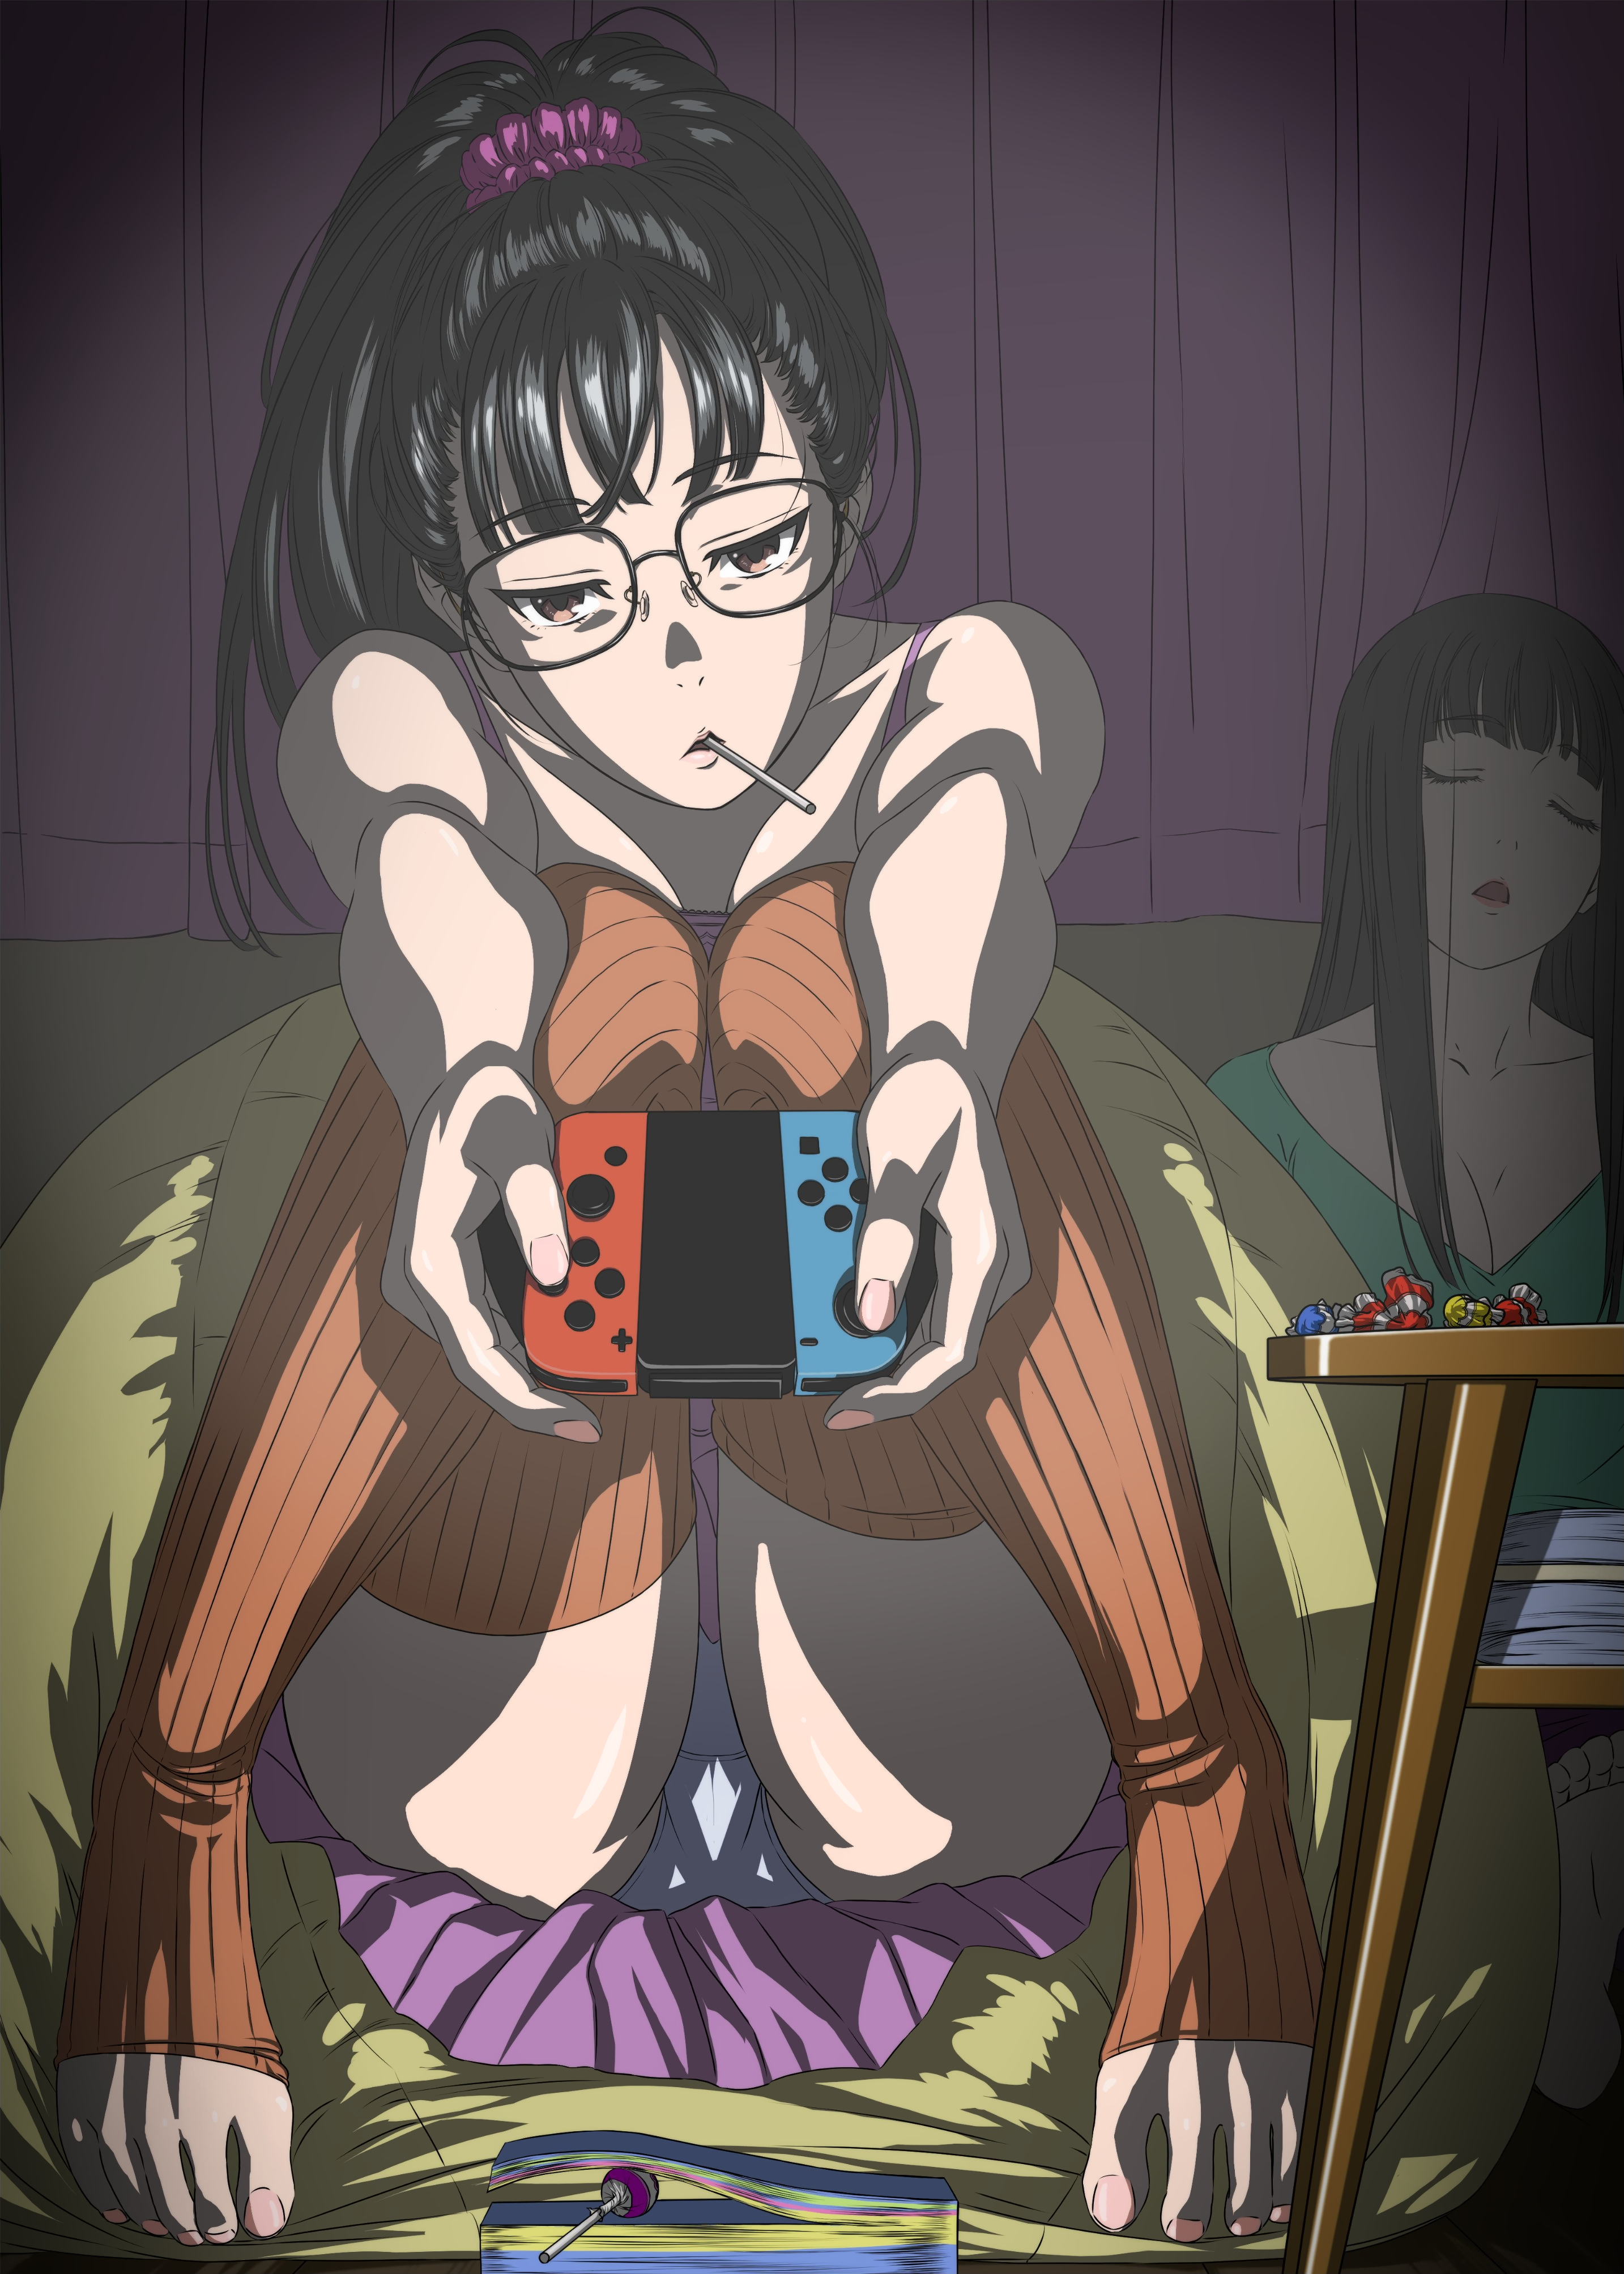 ponytail, bangs, women with glasses, ass, original characters, anime